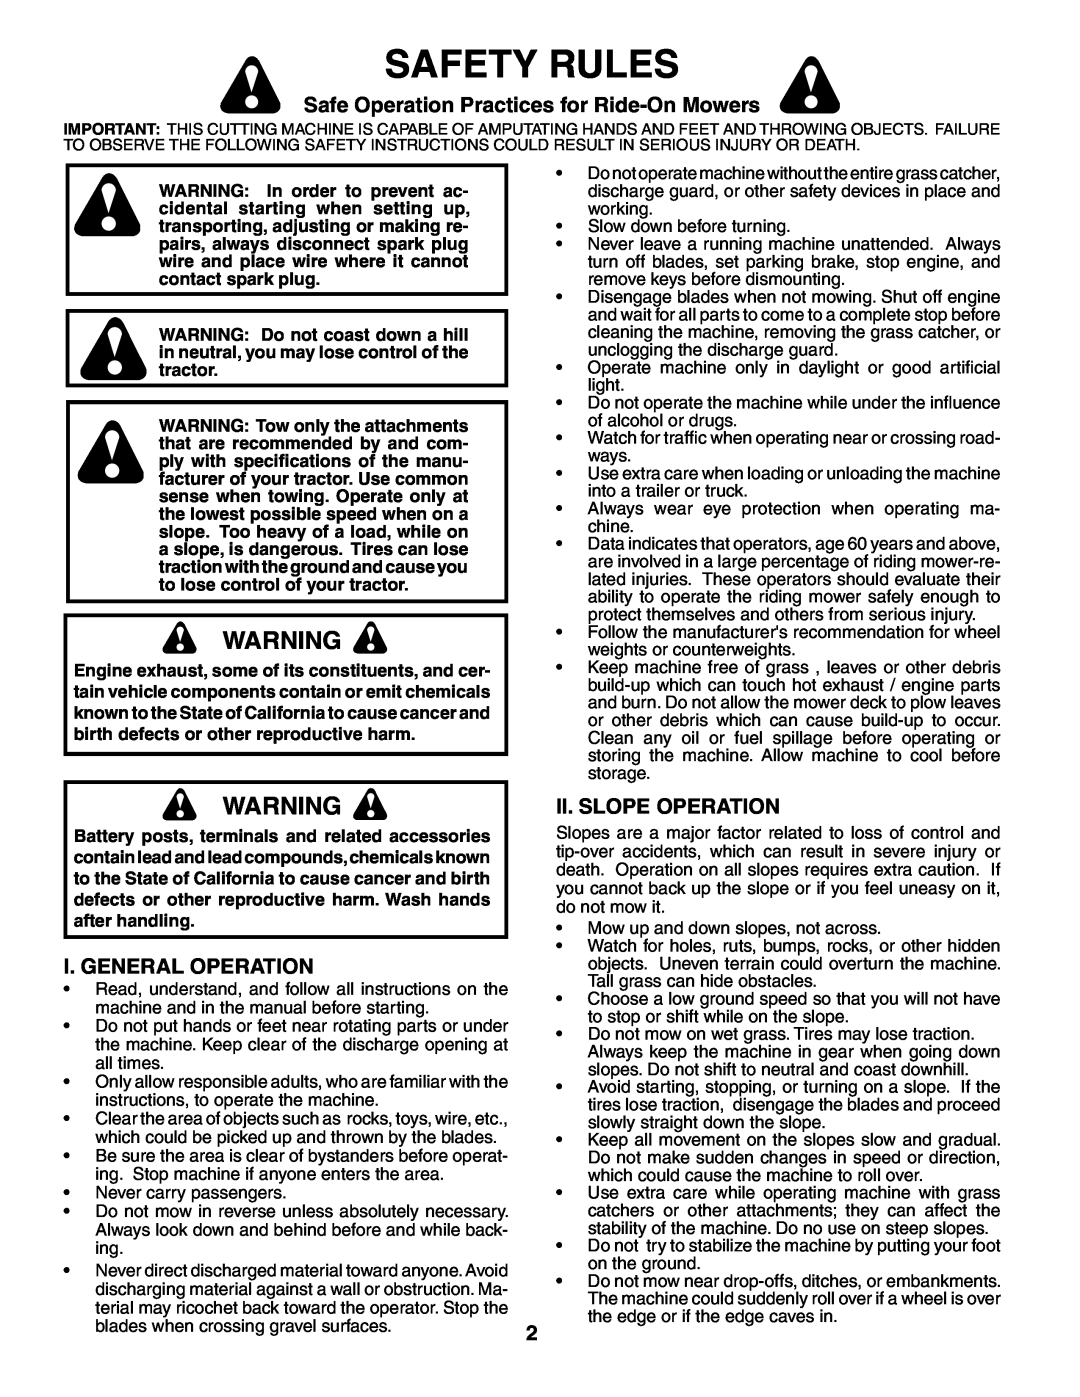 Poulan 196085 manual Safety Rules, Safe Operation Practices for Ride-On Mowers, I. General Operation, Ii. Slope Operation 